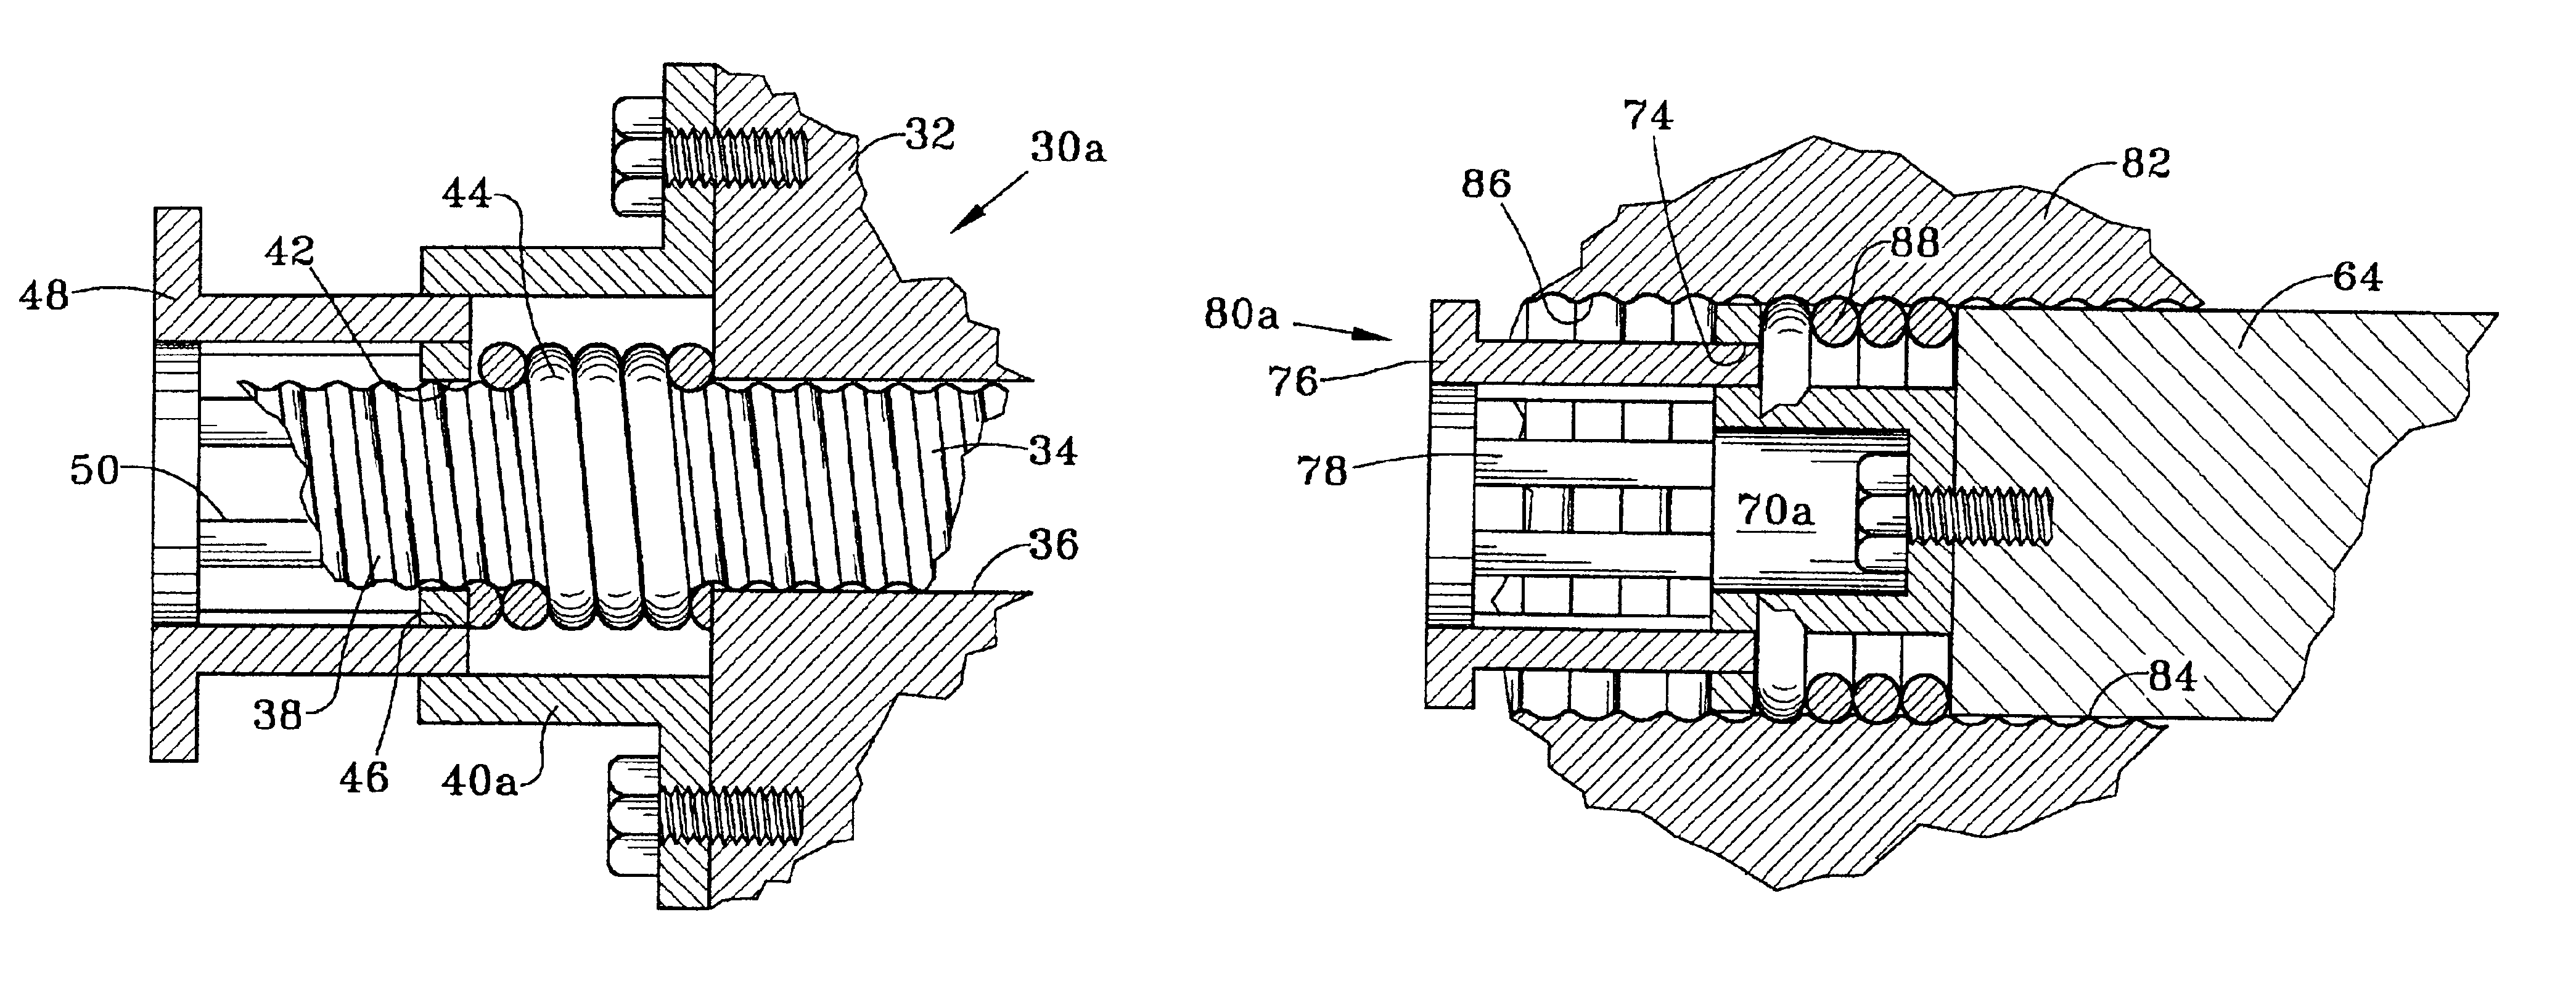 Apparatus and method for retarding translation between two bodies